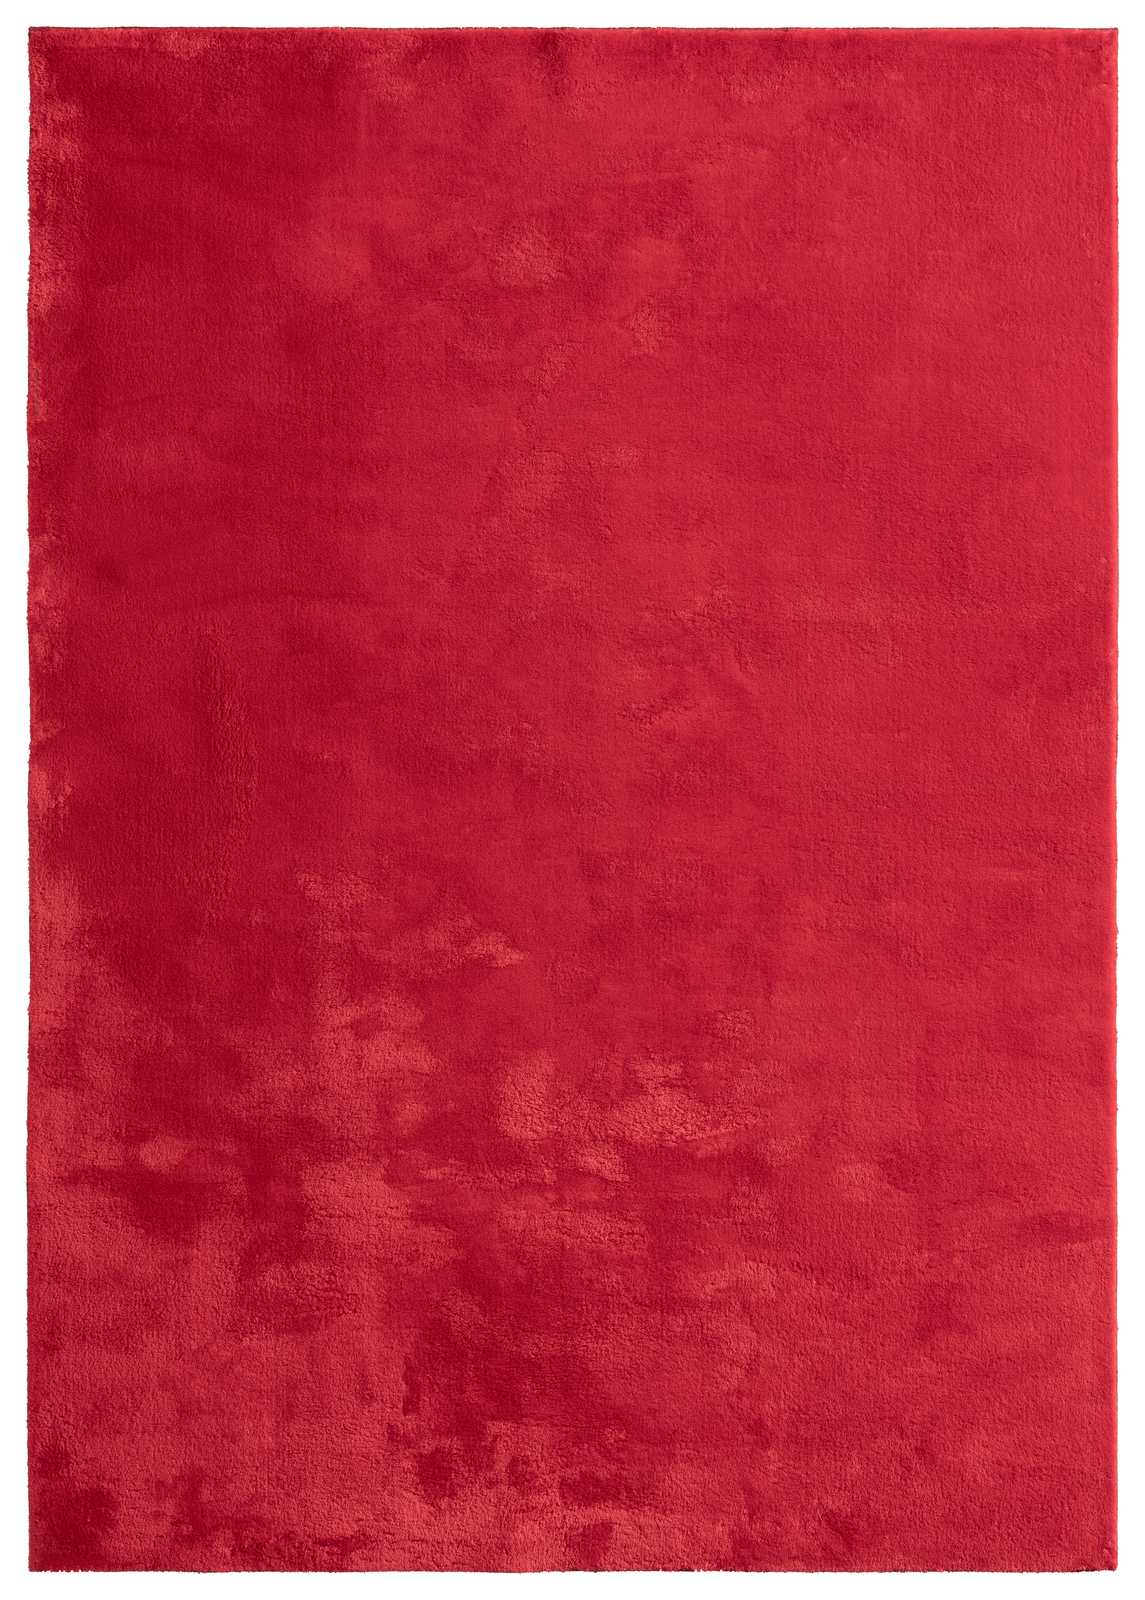             Extra soft high pile carpet in red - 110 x 60 cm
        